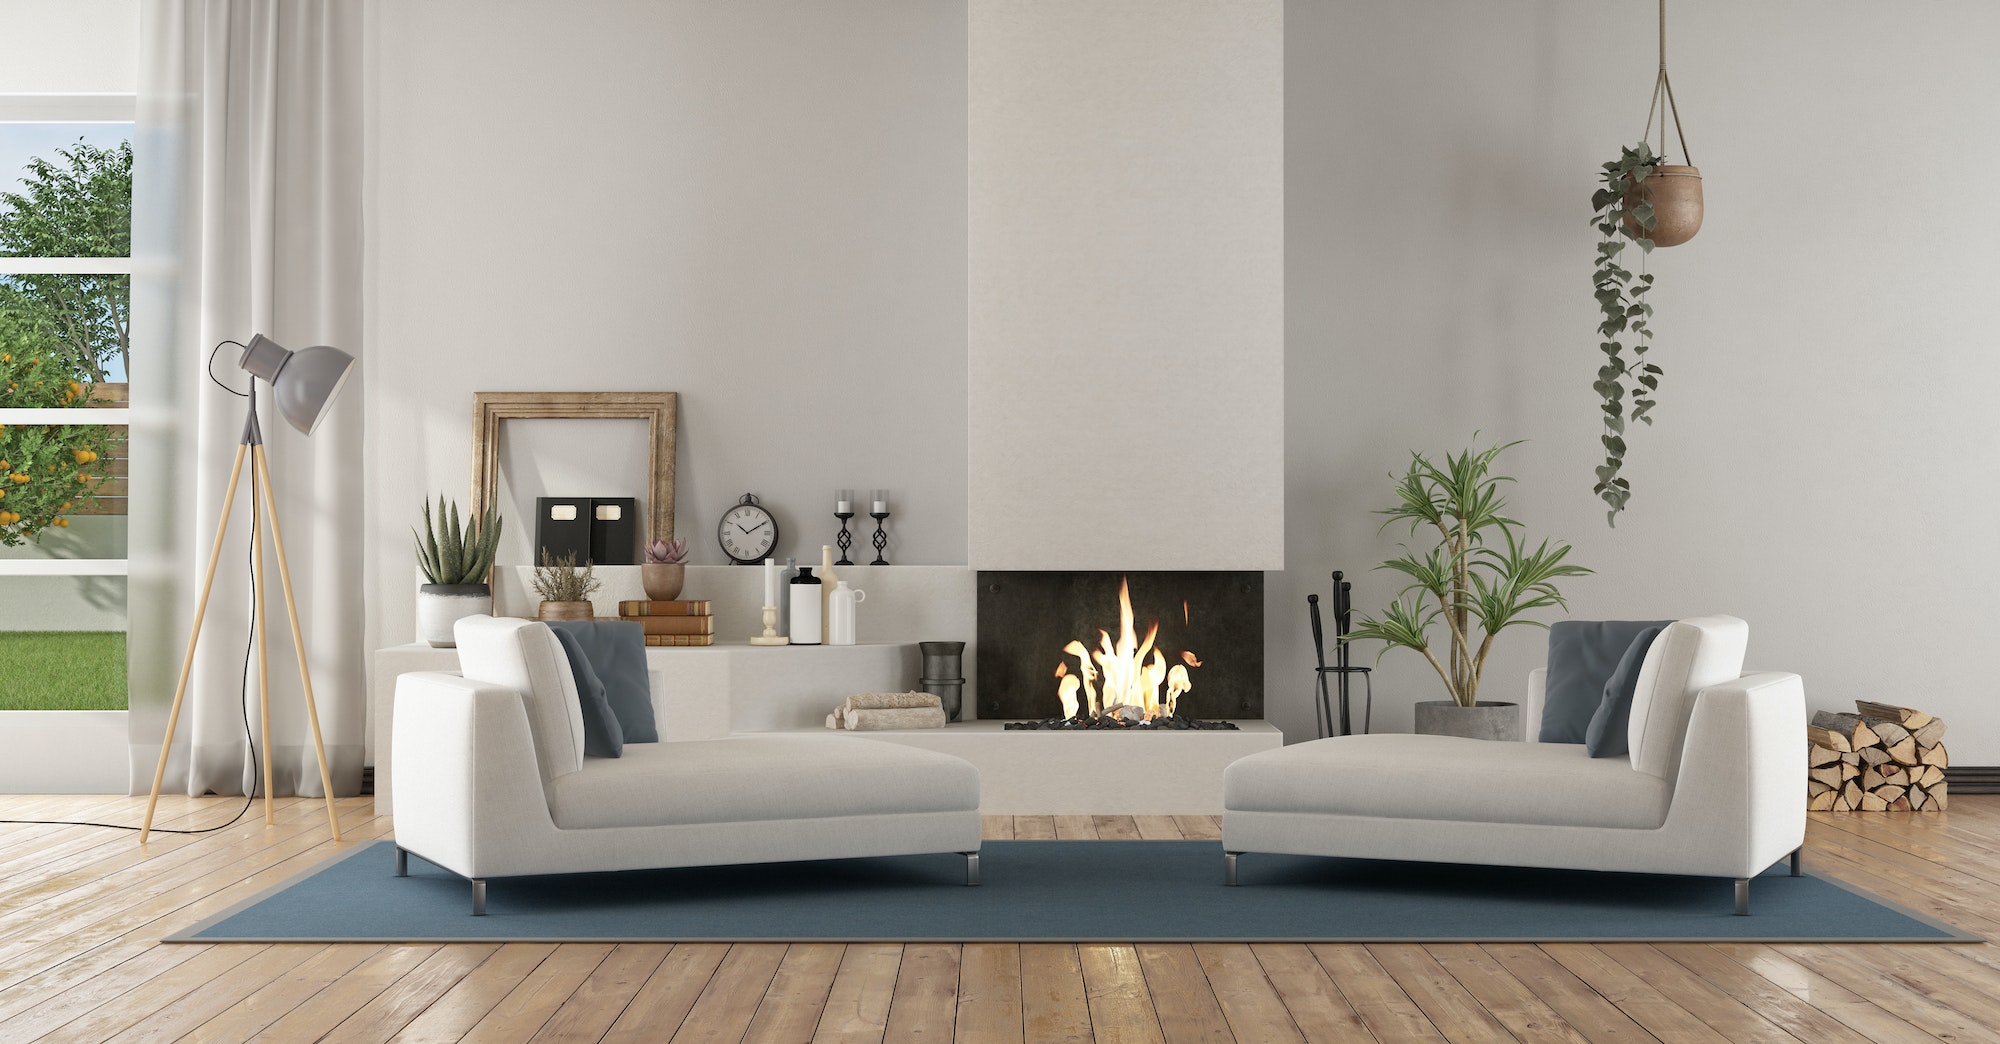 5 Modern Living Room Ideas Featuring A Fireplace And Series of Niche Shelves for Displaying Decor